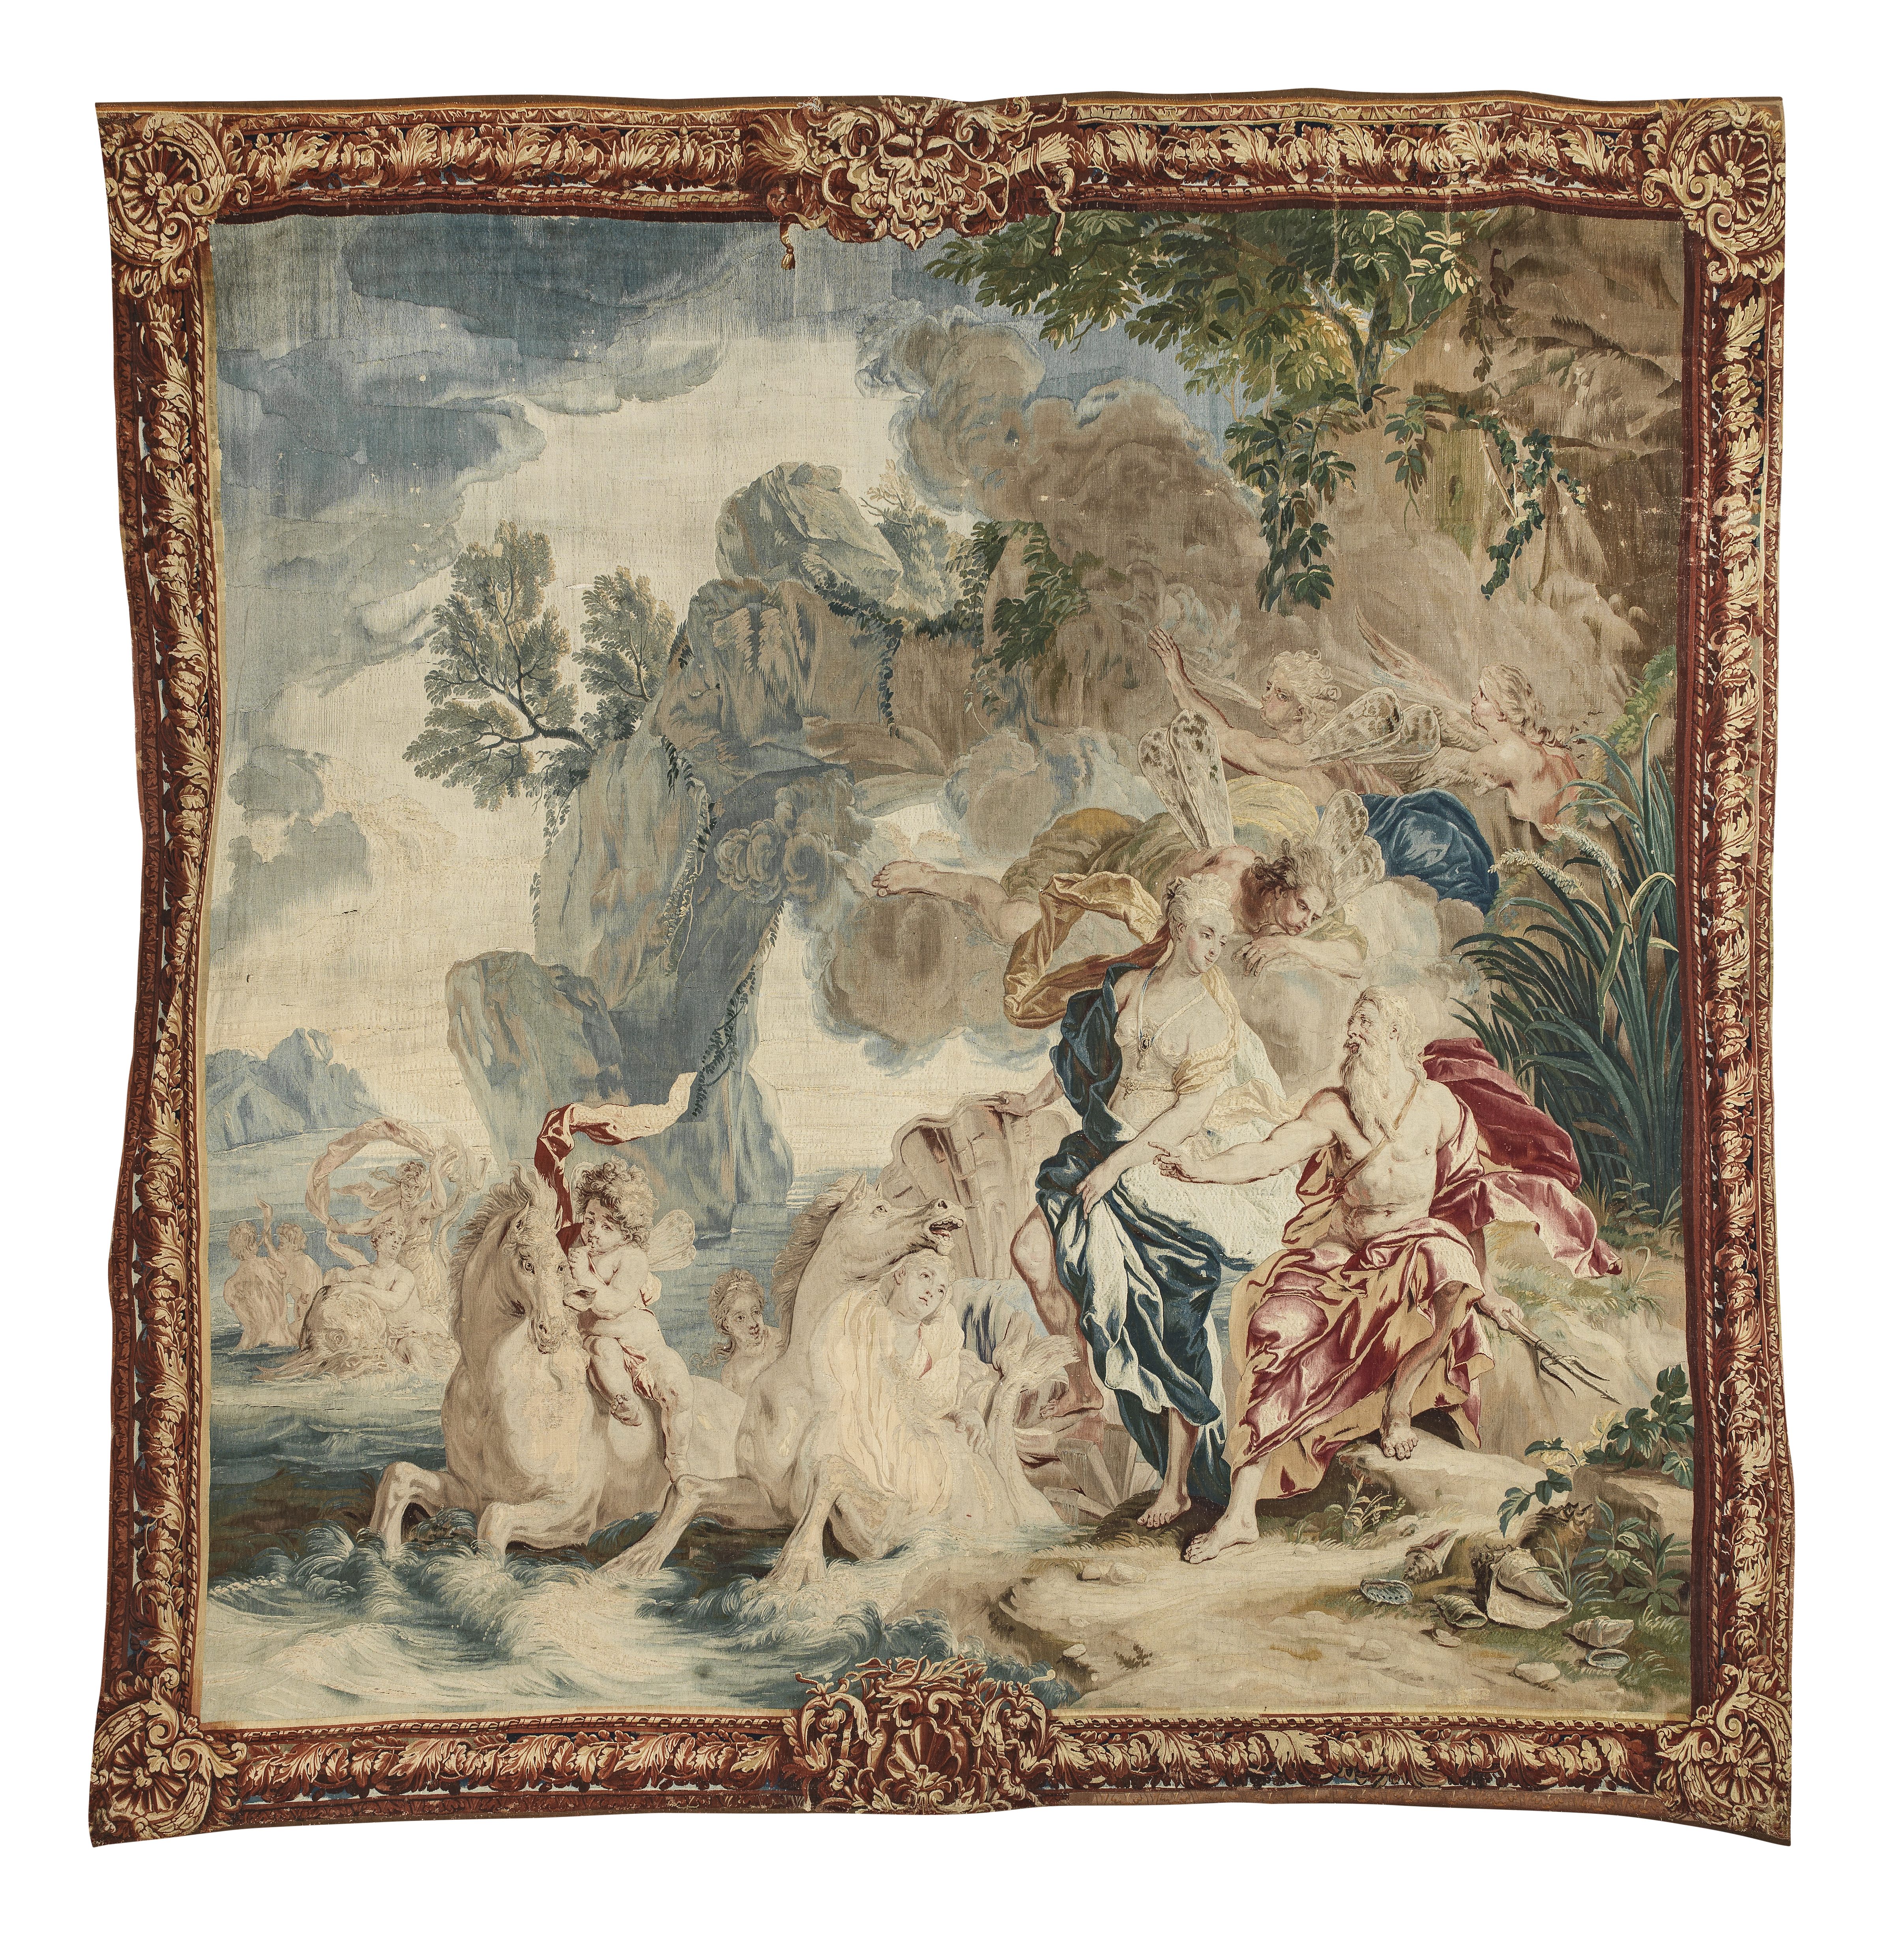 A striking mythological tapestry Brussels, early 18th century, possibly from the Leyniers worksh...